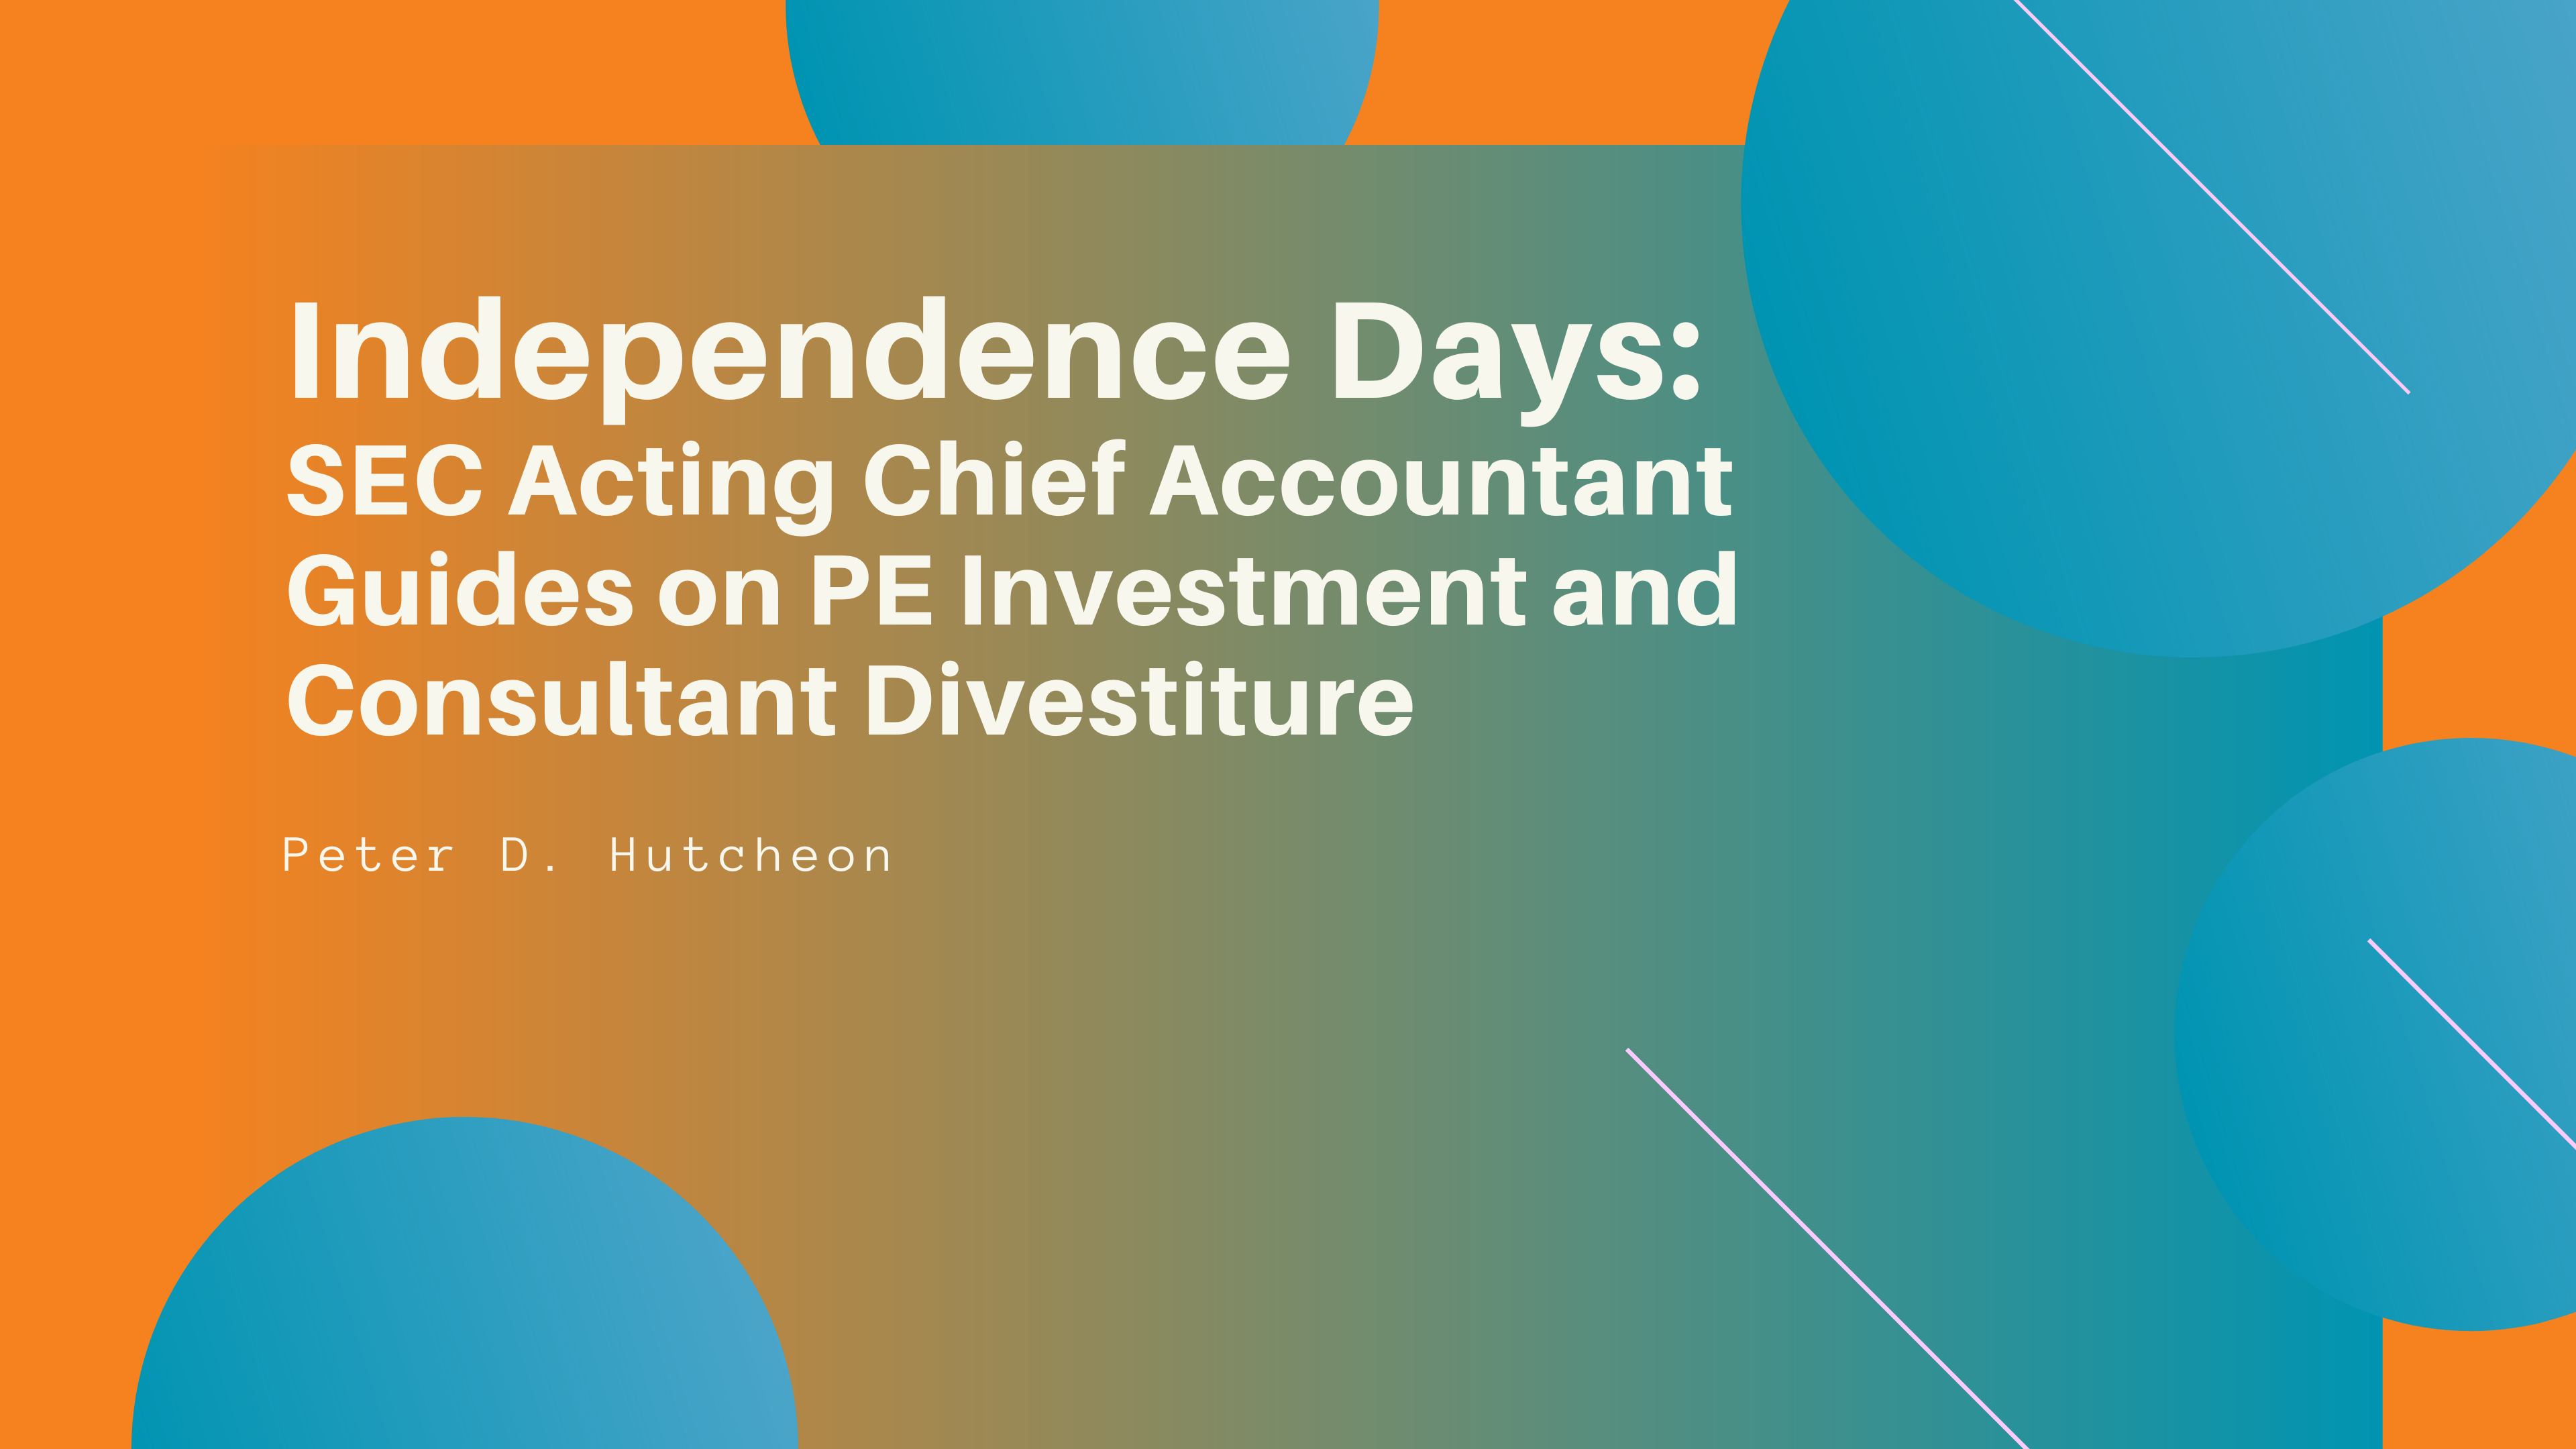 Independence Days: SEC Acting Chief Accountant Guides on PE Investment and Consultant Divestiture